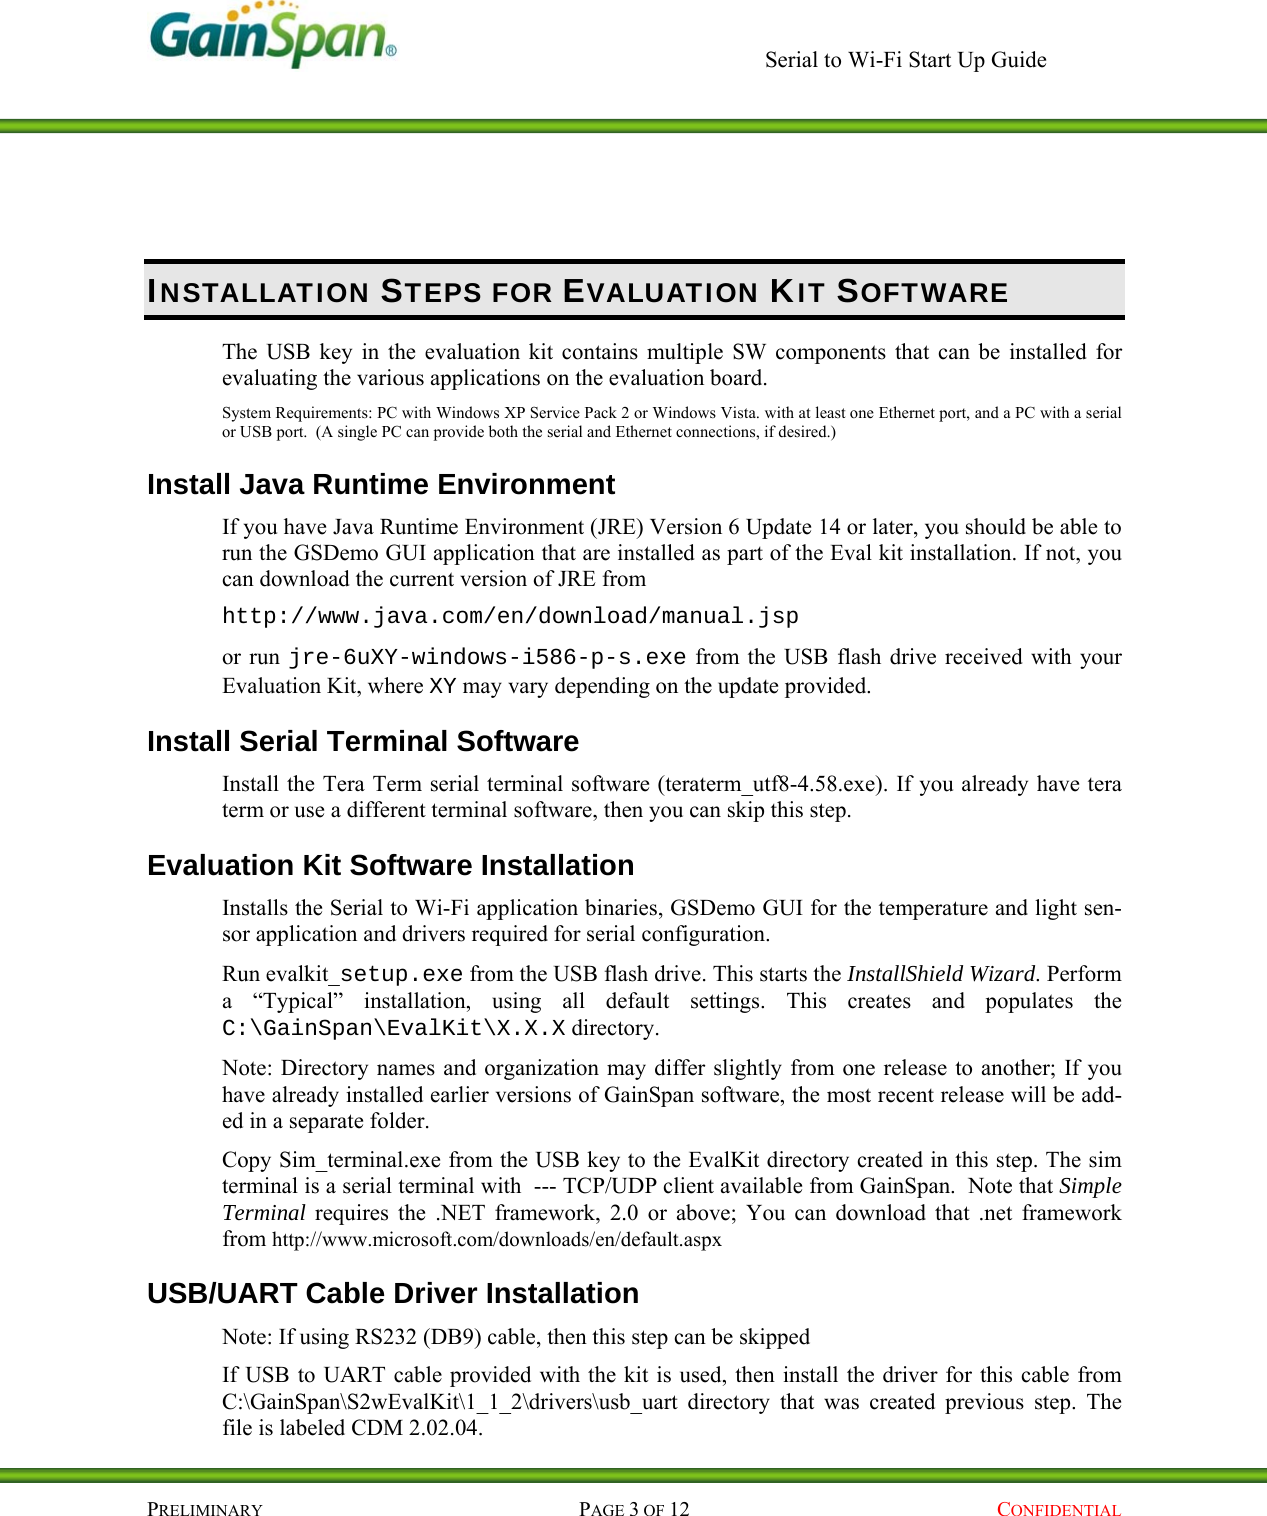     Serial to Wi-Fi Start Up Guide    PRELIMINARY PAGE 3 OF 12  CONFIDENTIAL INSTALLATION STEPS FOR EVALUATION KIT SOFTWARE The USB key in the evaluation kit contains multiple SW components that can be installed for evaluating the various applications on the evaluation board.  System Requirements: PC with Windows XP Service Pack 2 or Windows Vista. with at least one Ethernet port, and a PC with a serial or USB port.  (A single PC can provide both the serial and Ethernet connections, if desired.) Install Java Runtime Environment If you have Java Runtime Environment (JRE) Version 6 Update 14 or later, you should be able to run the GSDemo GUI application that are installed as part of the Eval kit installation. If not, you can download the current version of JRE from  http://www.java.com/en/download/manual.jsp or run jre-6uXY-windows-i586-p-s.exe from the USB flash drive received with your Evaluation Kit, where XY may vary depending on the update provided. Install Serial Terminal Software Install the Tera Term serial terminal software (teraterm_utf8-4.58.exe). If you already have tera term or use a different terminal software, then you can skip this step. Evaluation Kit Software Installation   Installs the Serial to Wi-Fi application binaries, GSDemo GUI for the temperature and light sen-sor application and drivers required for serial configuration.  Run evalkit_setup.exe from the USB flash drive. This starts the InstallShield Wizard. Perform a “Typical” installation, using all default settings. This creates and populates the C:\GainSpan\EvalKit\X.X.X directory.  Note: Directory names and organization may differ slightly from one release to another; If you have already installed earlier versions of GainSpan software, the most recent release will be add-ed in a separate folder. Copy Sim_terminal.exe from the USB key to the EvalKit directory created in this step. The sim terminal is a serial terminal with  --- TCP/UDP client available from GainSpan.  Note that Simple Terminal requires the .NET framework, 2.0 or above; You can download that .net framework from http://www.microsoft.com/downloads/en/default.aspx USB/UART Cable Driver Installation Note: If using RS232 (DB9) cable, then this step can be skipped  If USB to UART cable provided with the kit is used, then install the driver for this cable from C:\GainSpan\S2wEvalKit\1_1_2\drivers\usb_uart directory that was created previous step. The file is labeled CDM 2.02.04. 